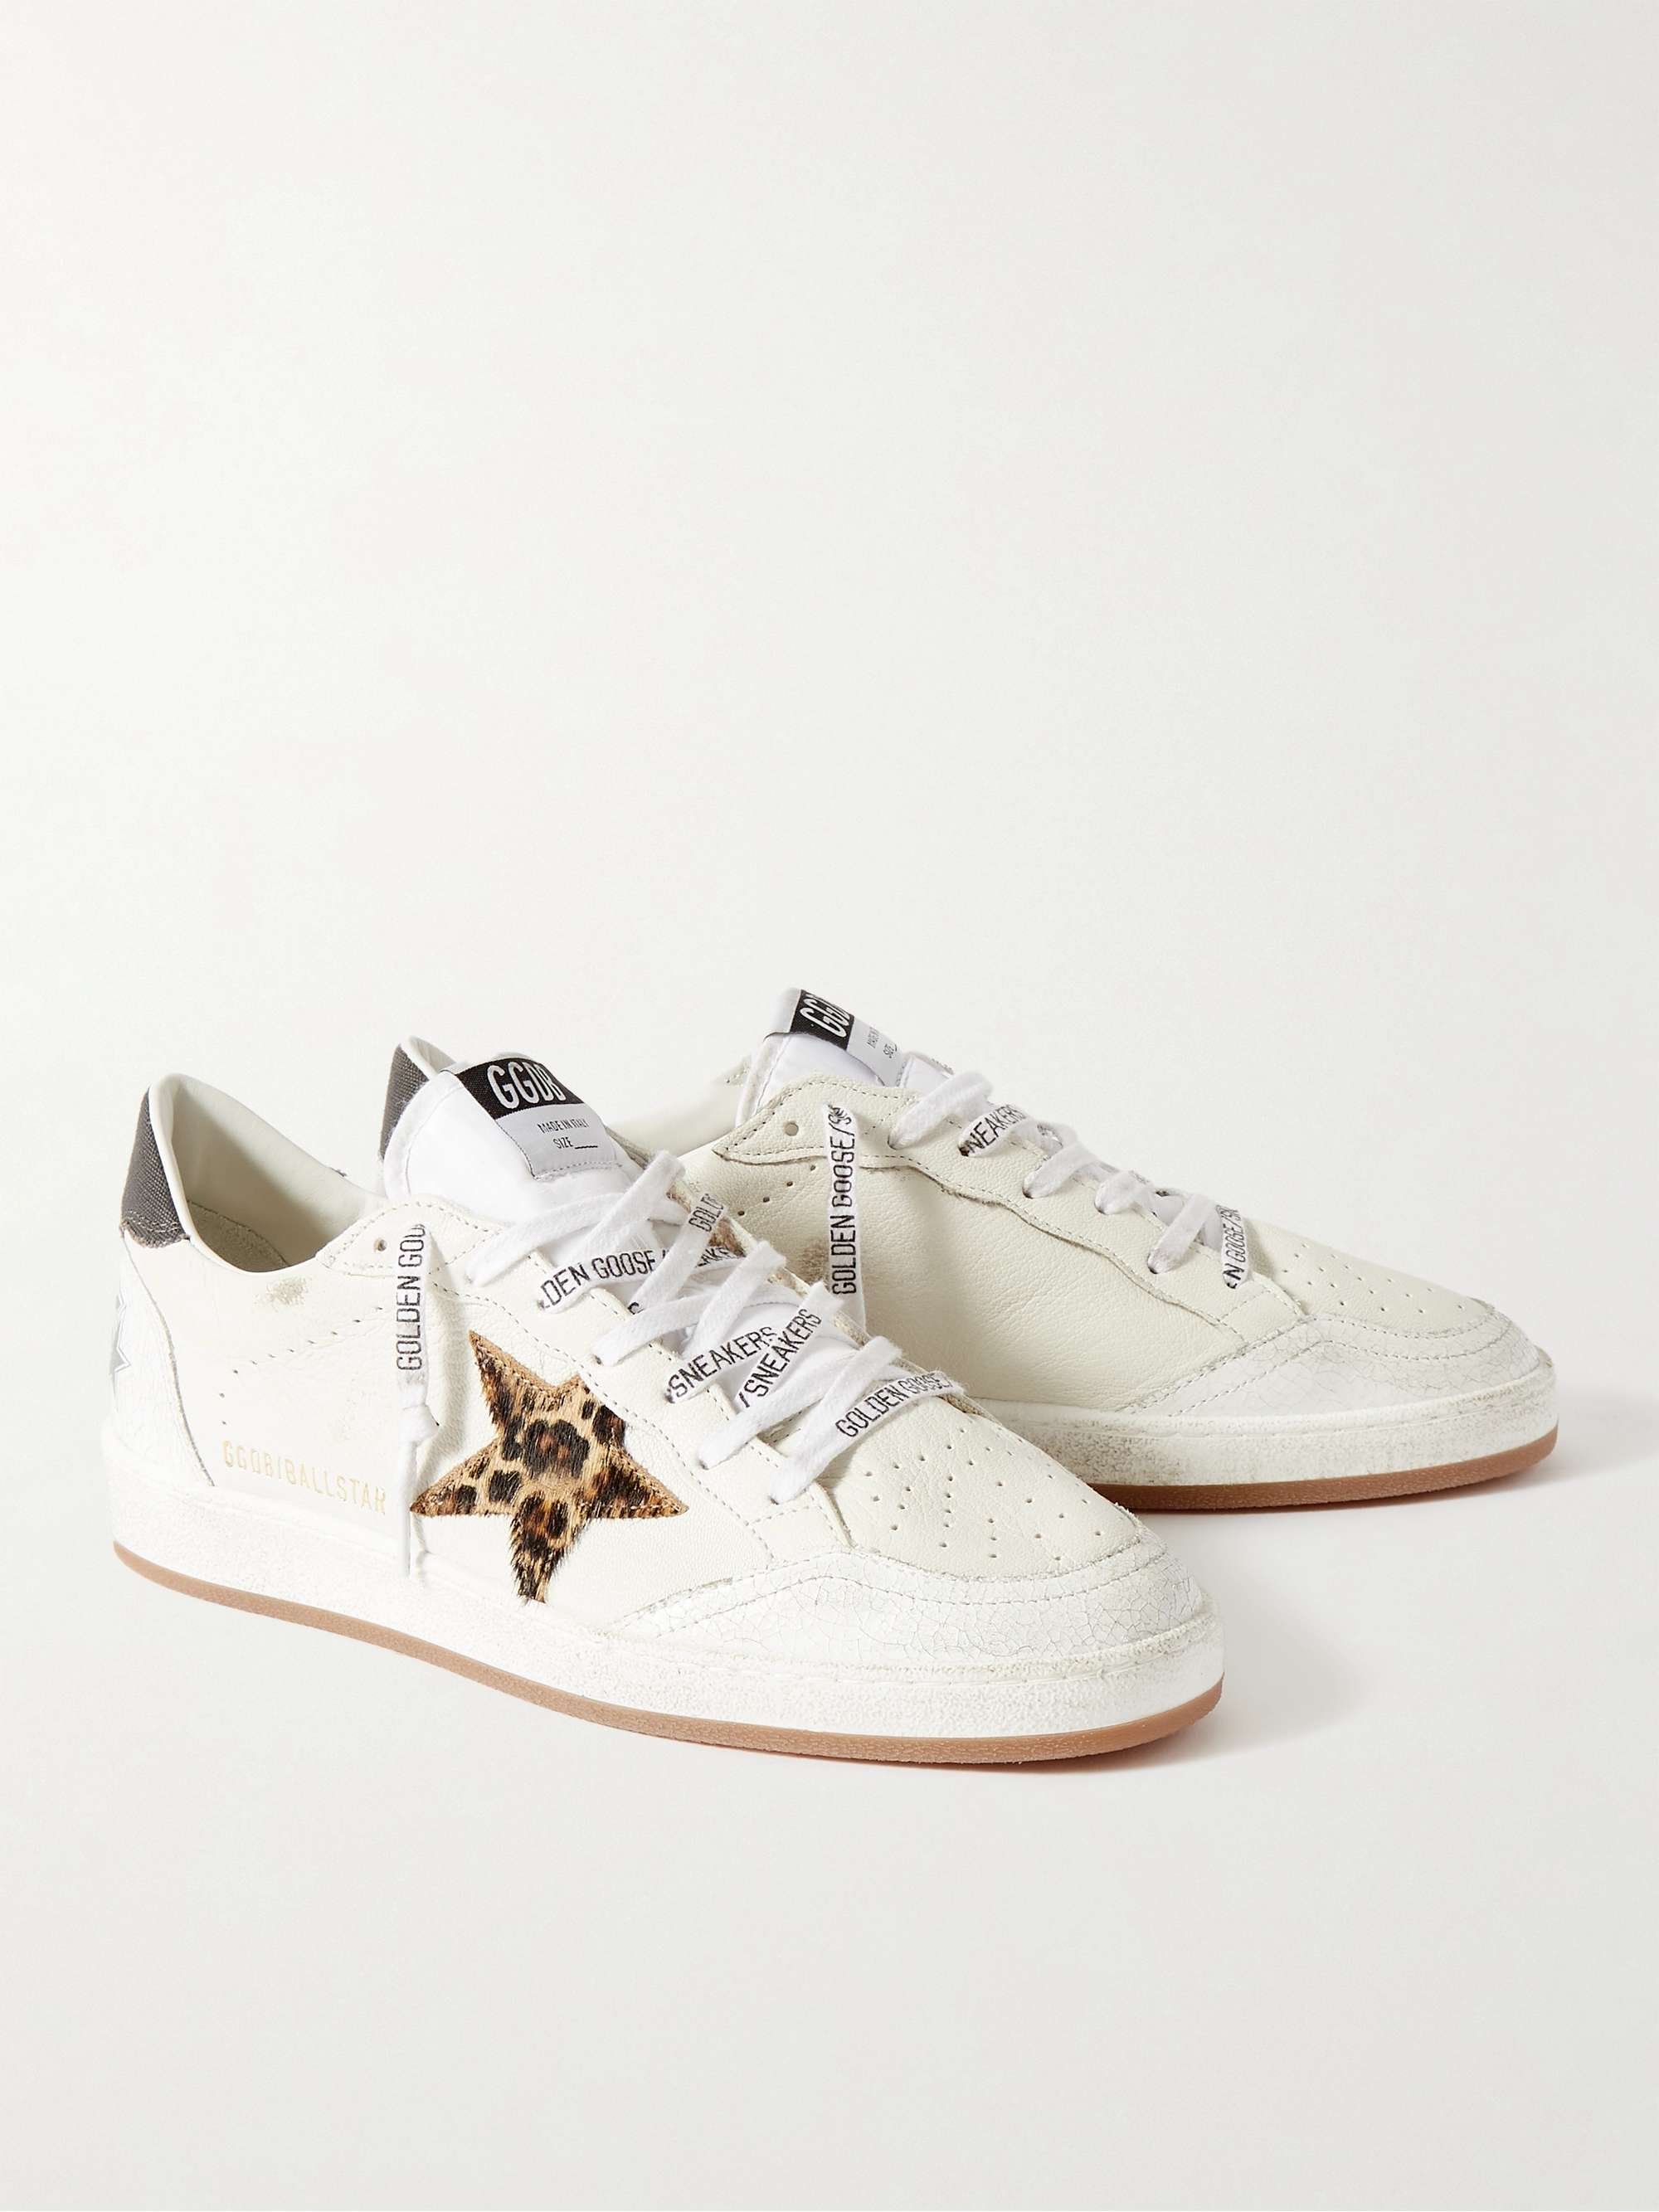 GOLDEN GOOSE Ballstar Distressed Calf Hair-Trimmed Leather Sneakers